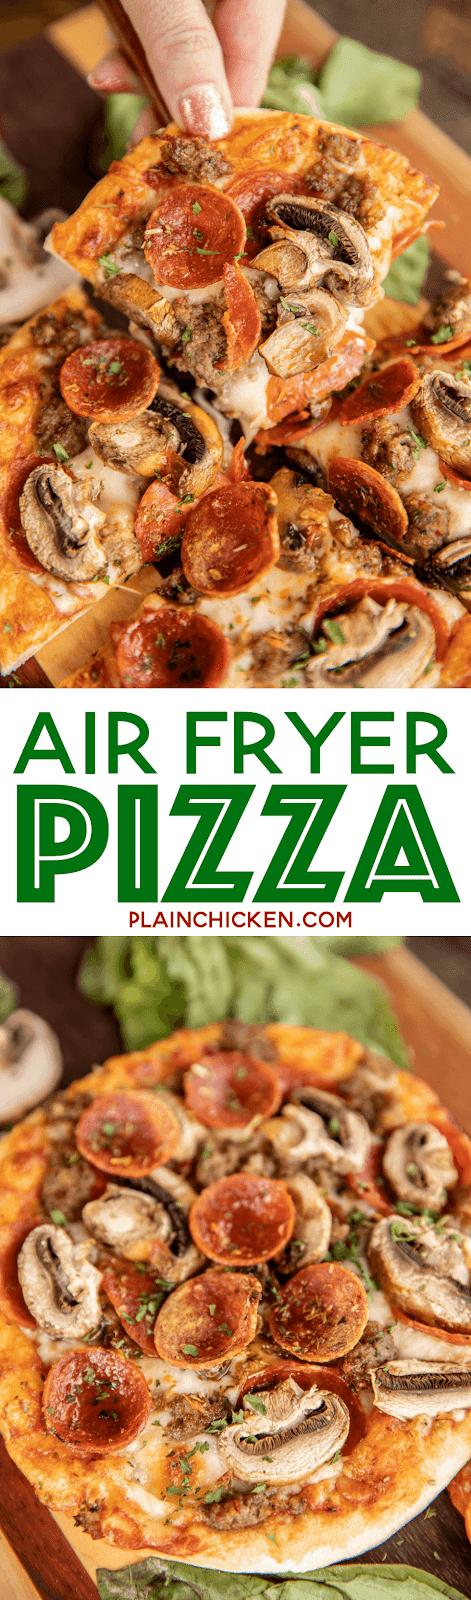 Air Fryer Pizza - hands down the BEST pizza EVER!! Individual pizzas ready to eat in 8 minutes. SO much better than delivery! Pizza dough, pizza sauce, mozzarella cheese and toppings. Use fresh store bought pizza dough or our Weight Watcher 2-Ingredient dough for a protein packed pizza. Great way to let the whole family get their favorite pizza! #airfryer #pizza